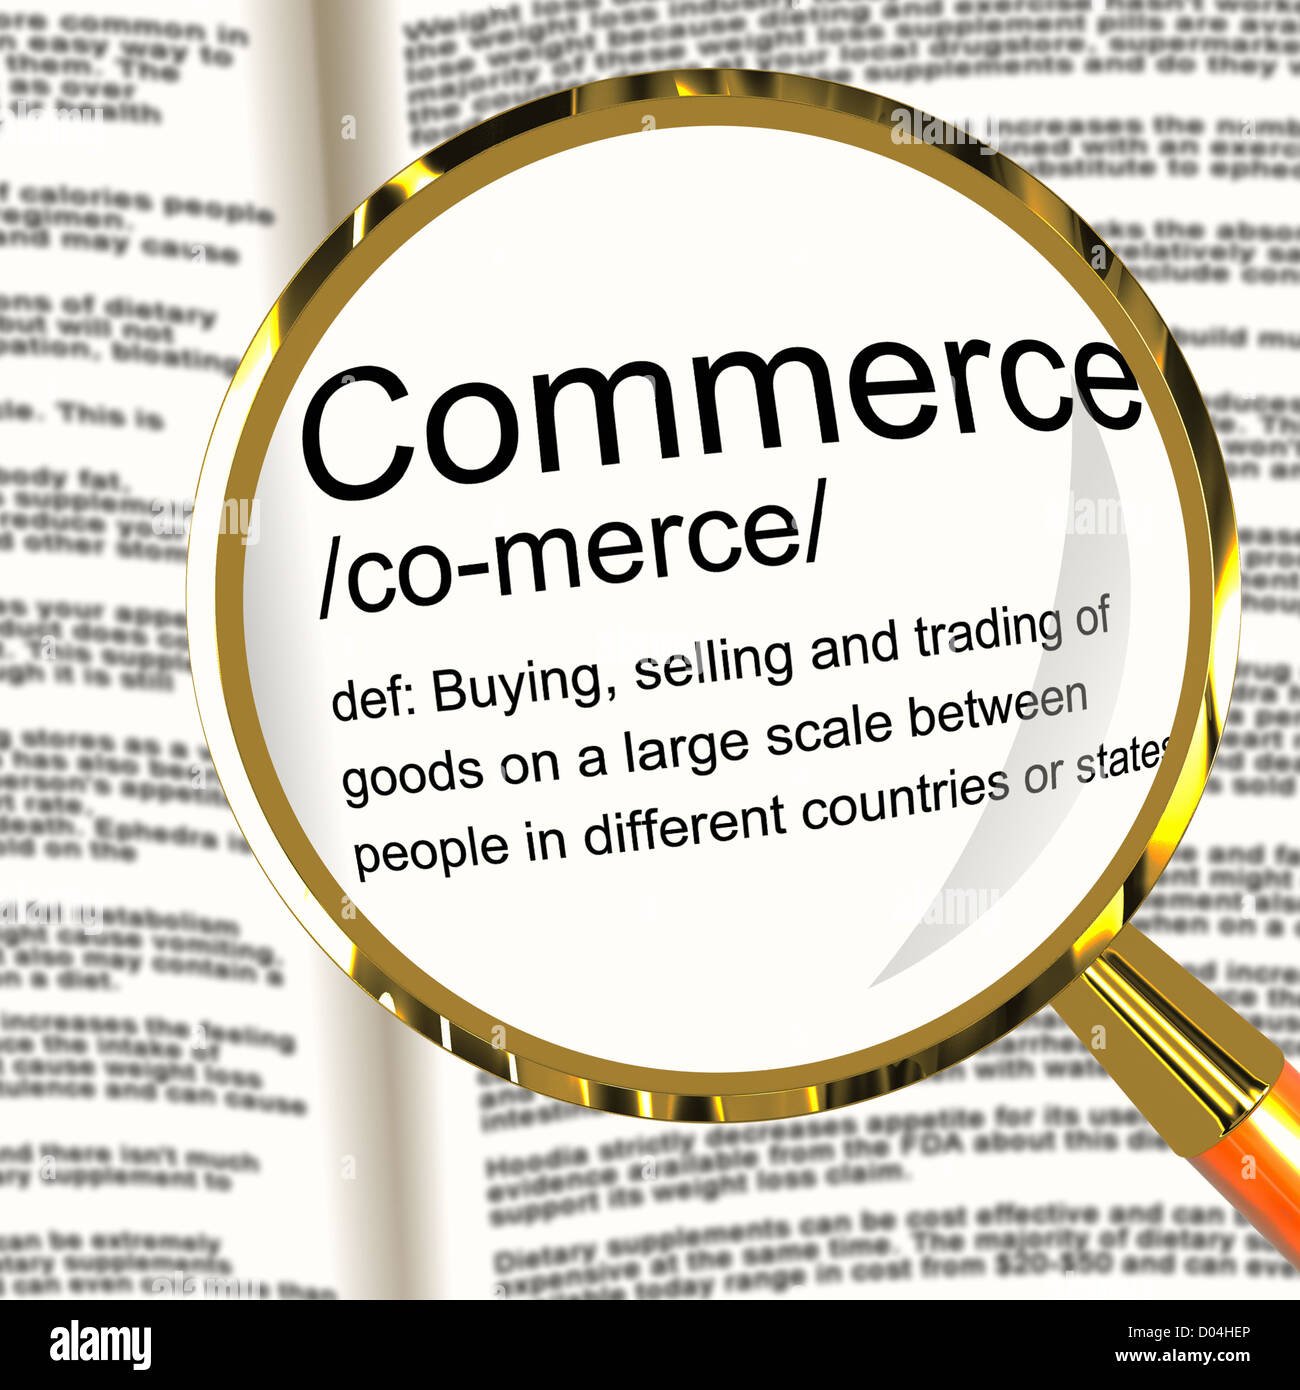 Commerce Definition Magnifier Shows Trading Buying And Selling Stock Photo